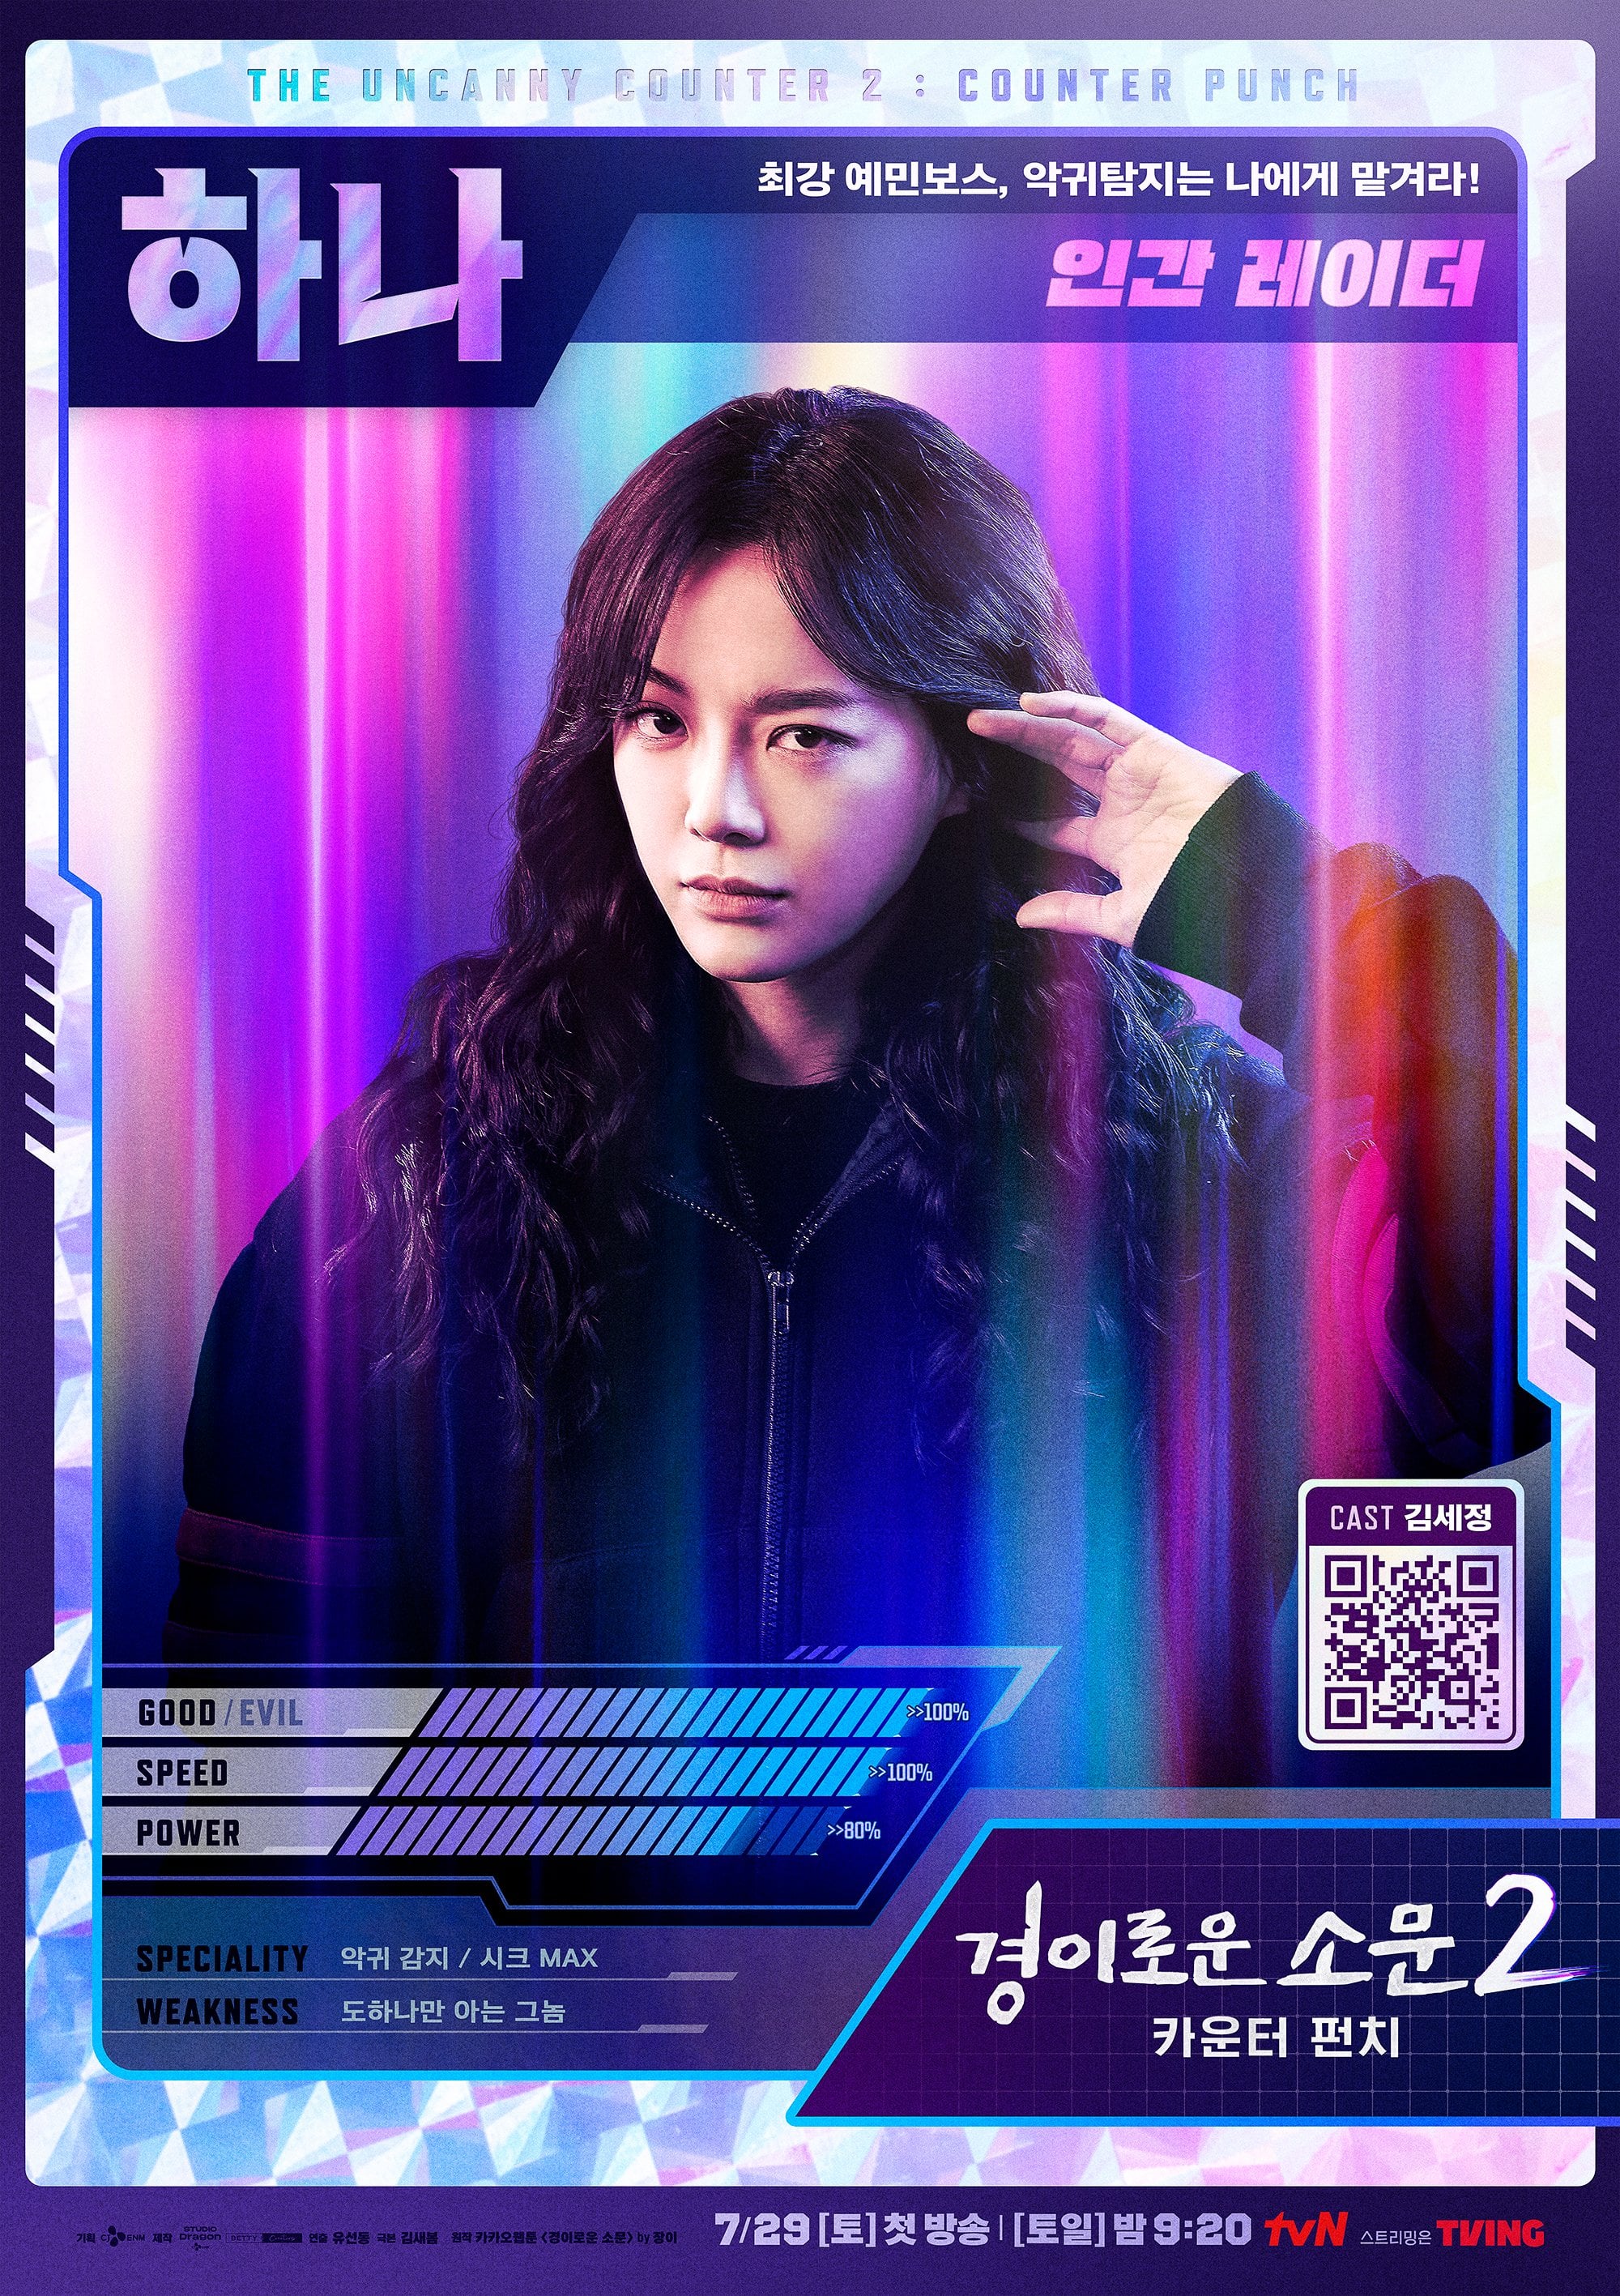 Kim Sejeong Tvn Drama The Uncanny Counter 2 Character Teaser Poster Ptkorea 3846